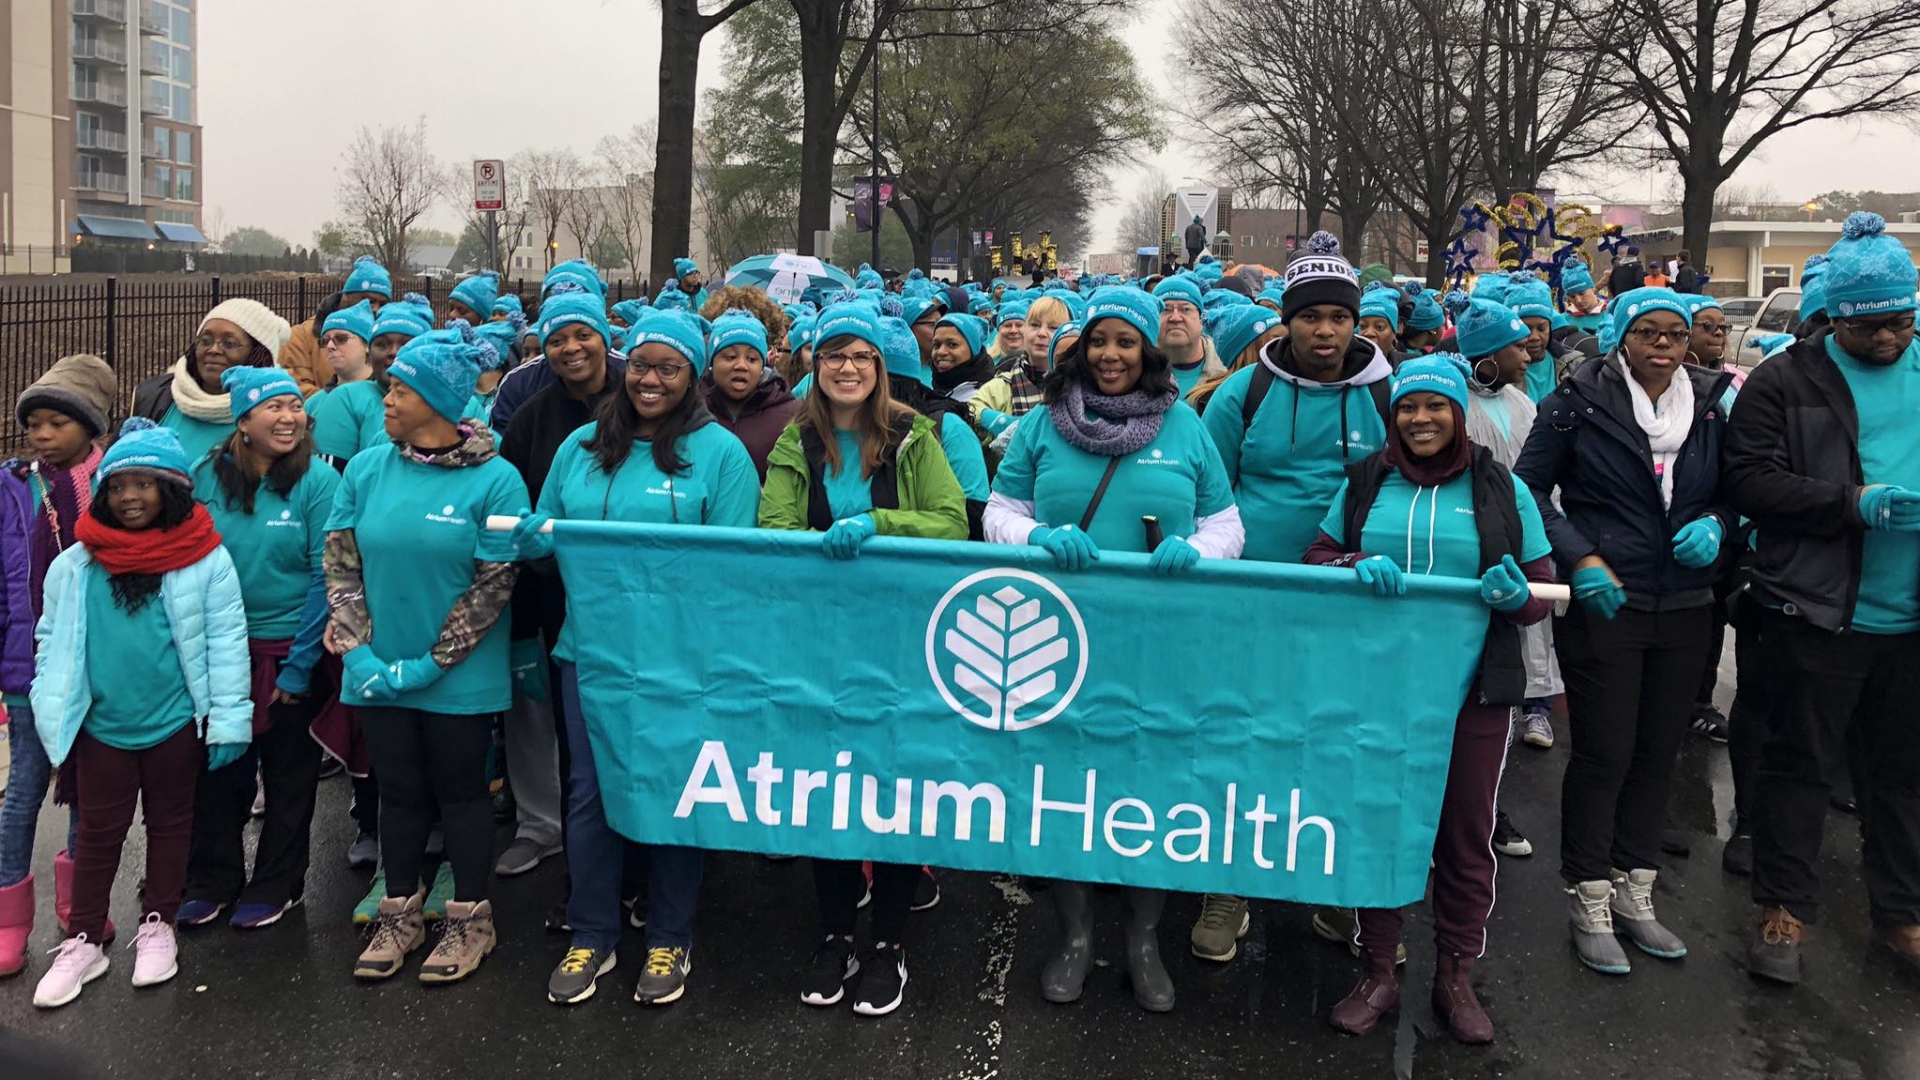 A Charlotte tradition since 1981, the Atrium Health Dr. Martin Luther King Jr. Holiday Parade in Uptown Charlotte included more than 100 community organizations, marching bands, floats and dance performers. 